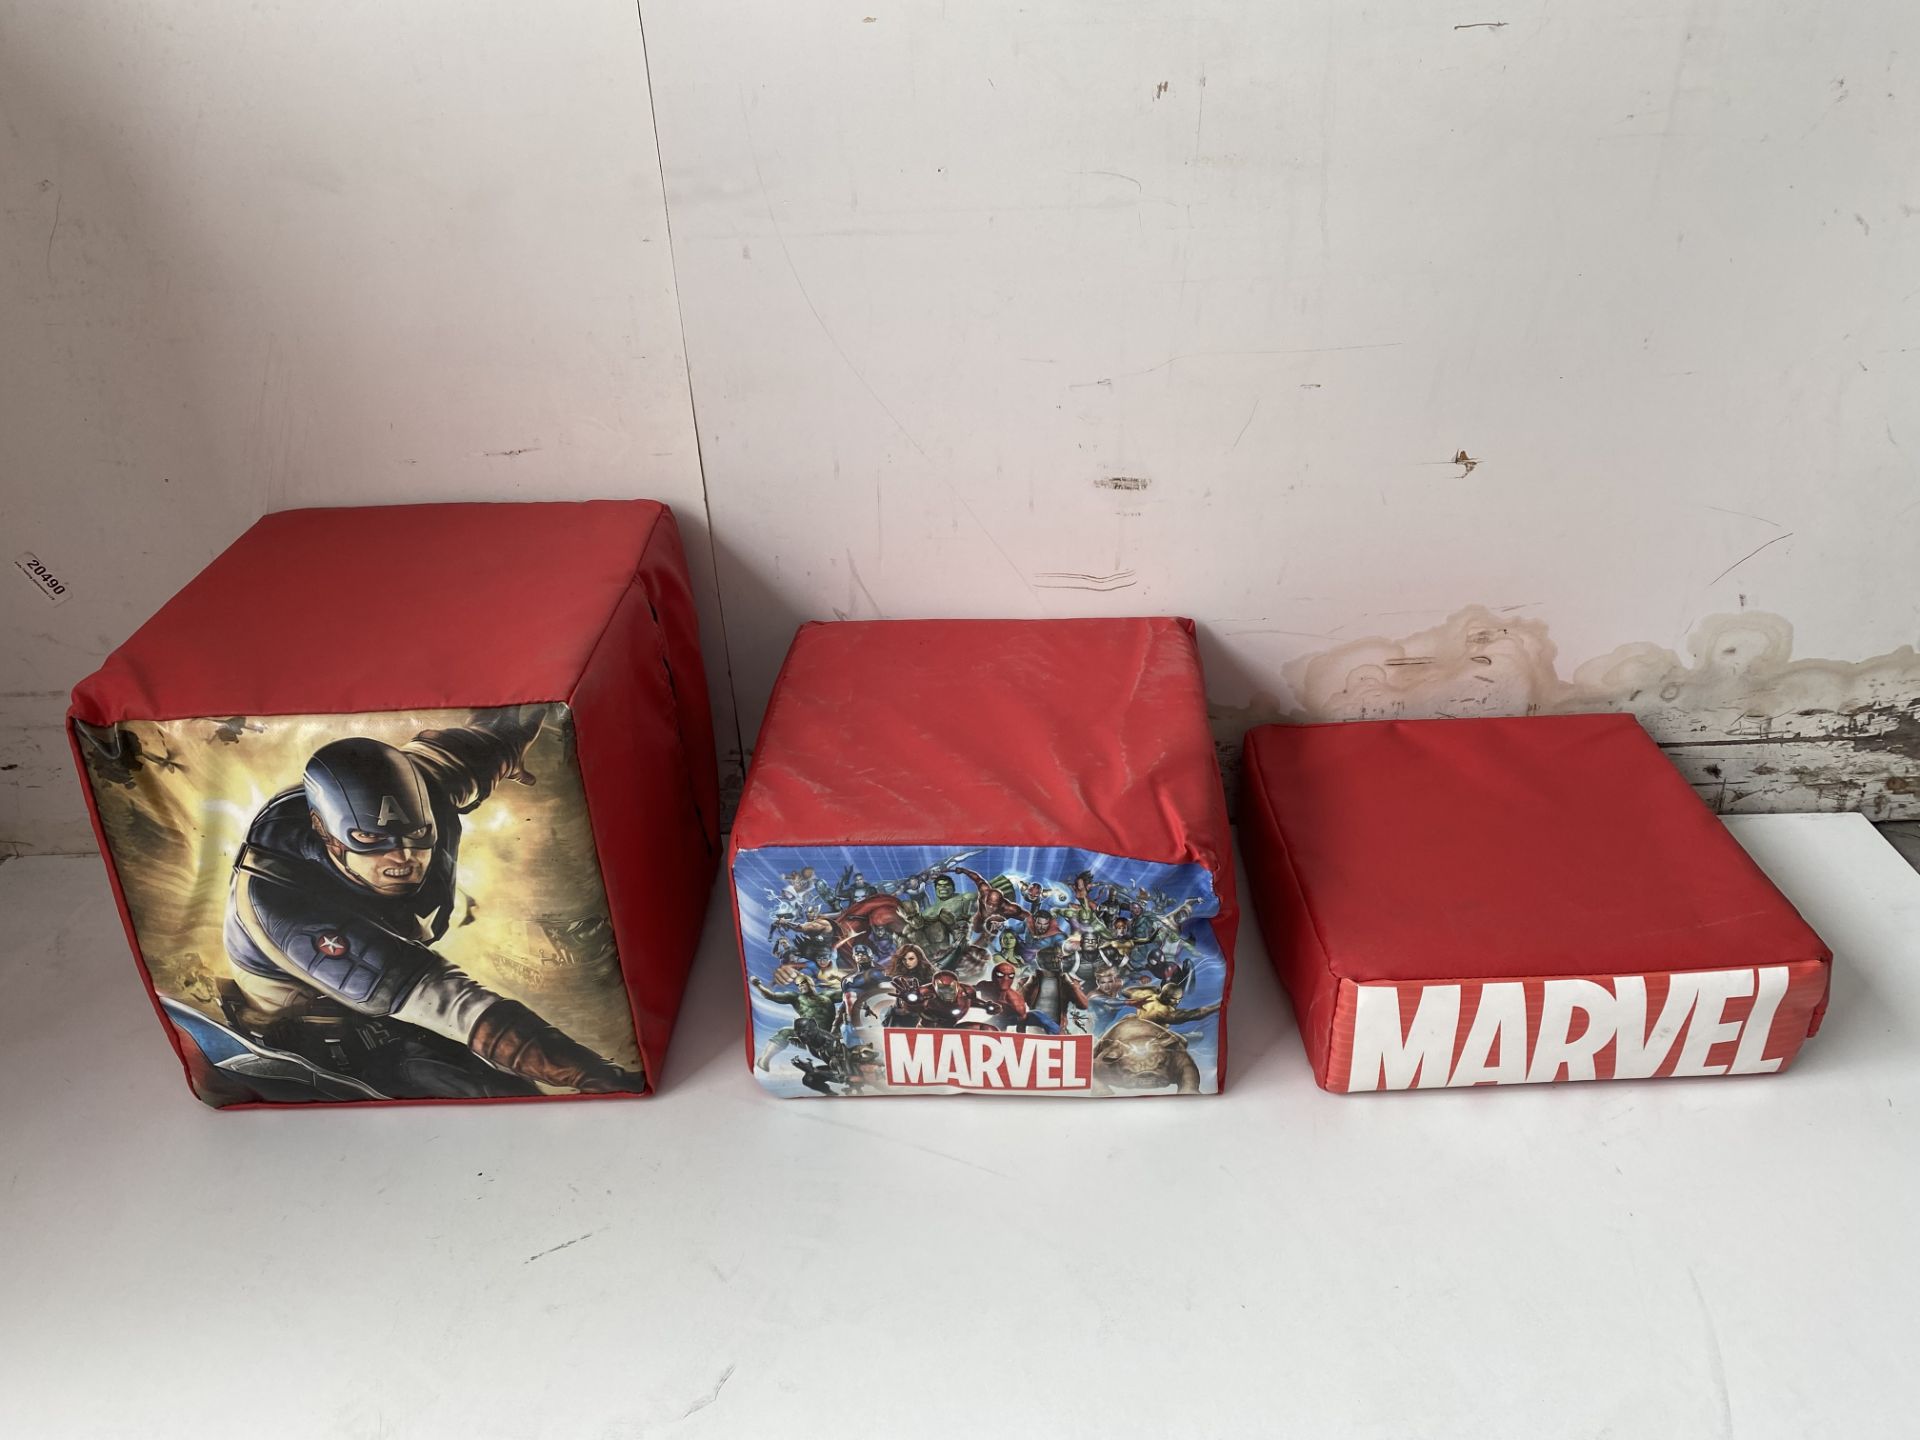 Marvel Themed Soft Play Block Sets - Image 10 of 12